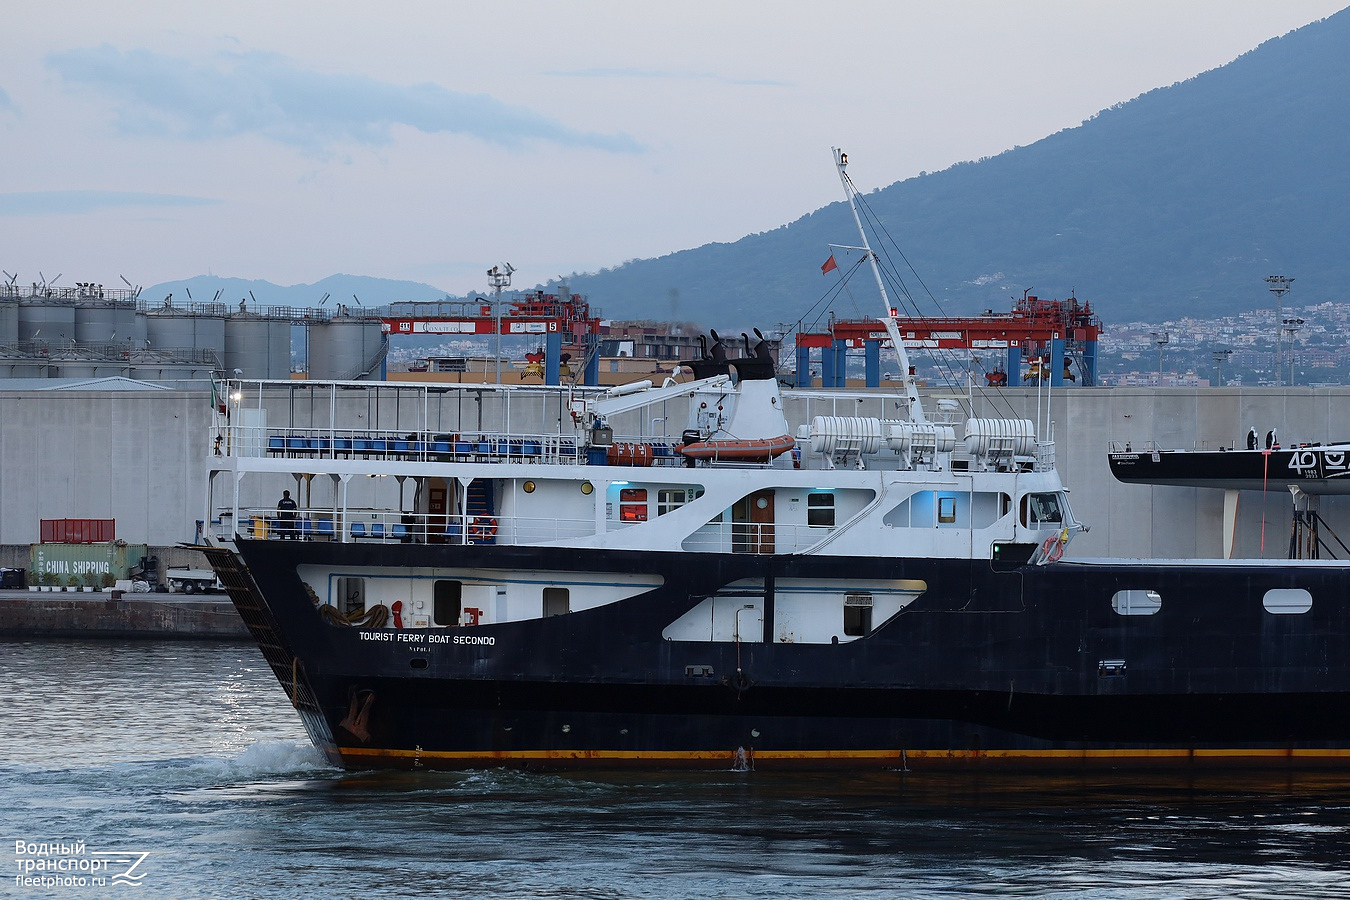 Tourist Ferry Boat Secondo. Vessel superstructures